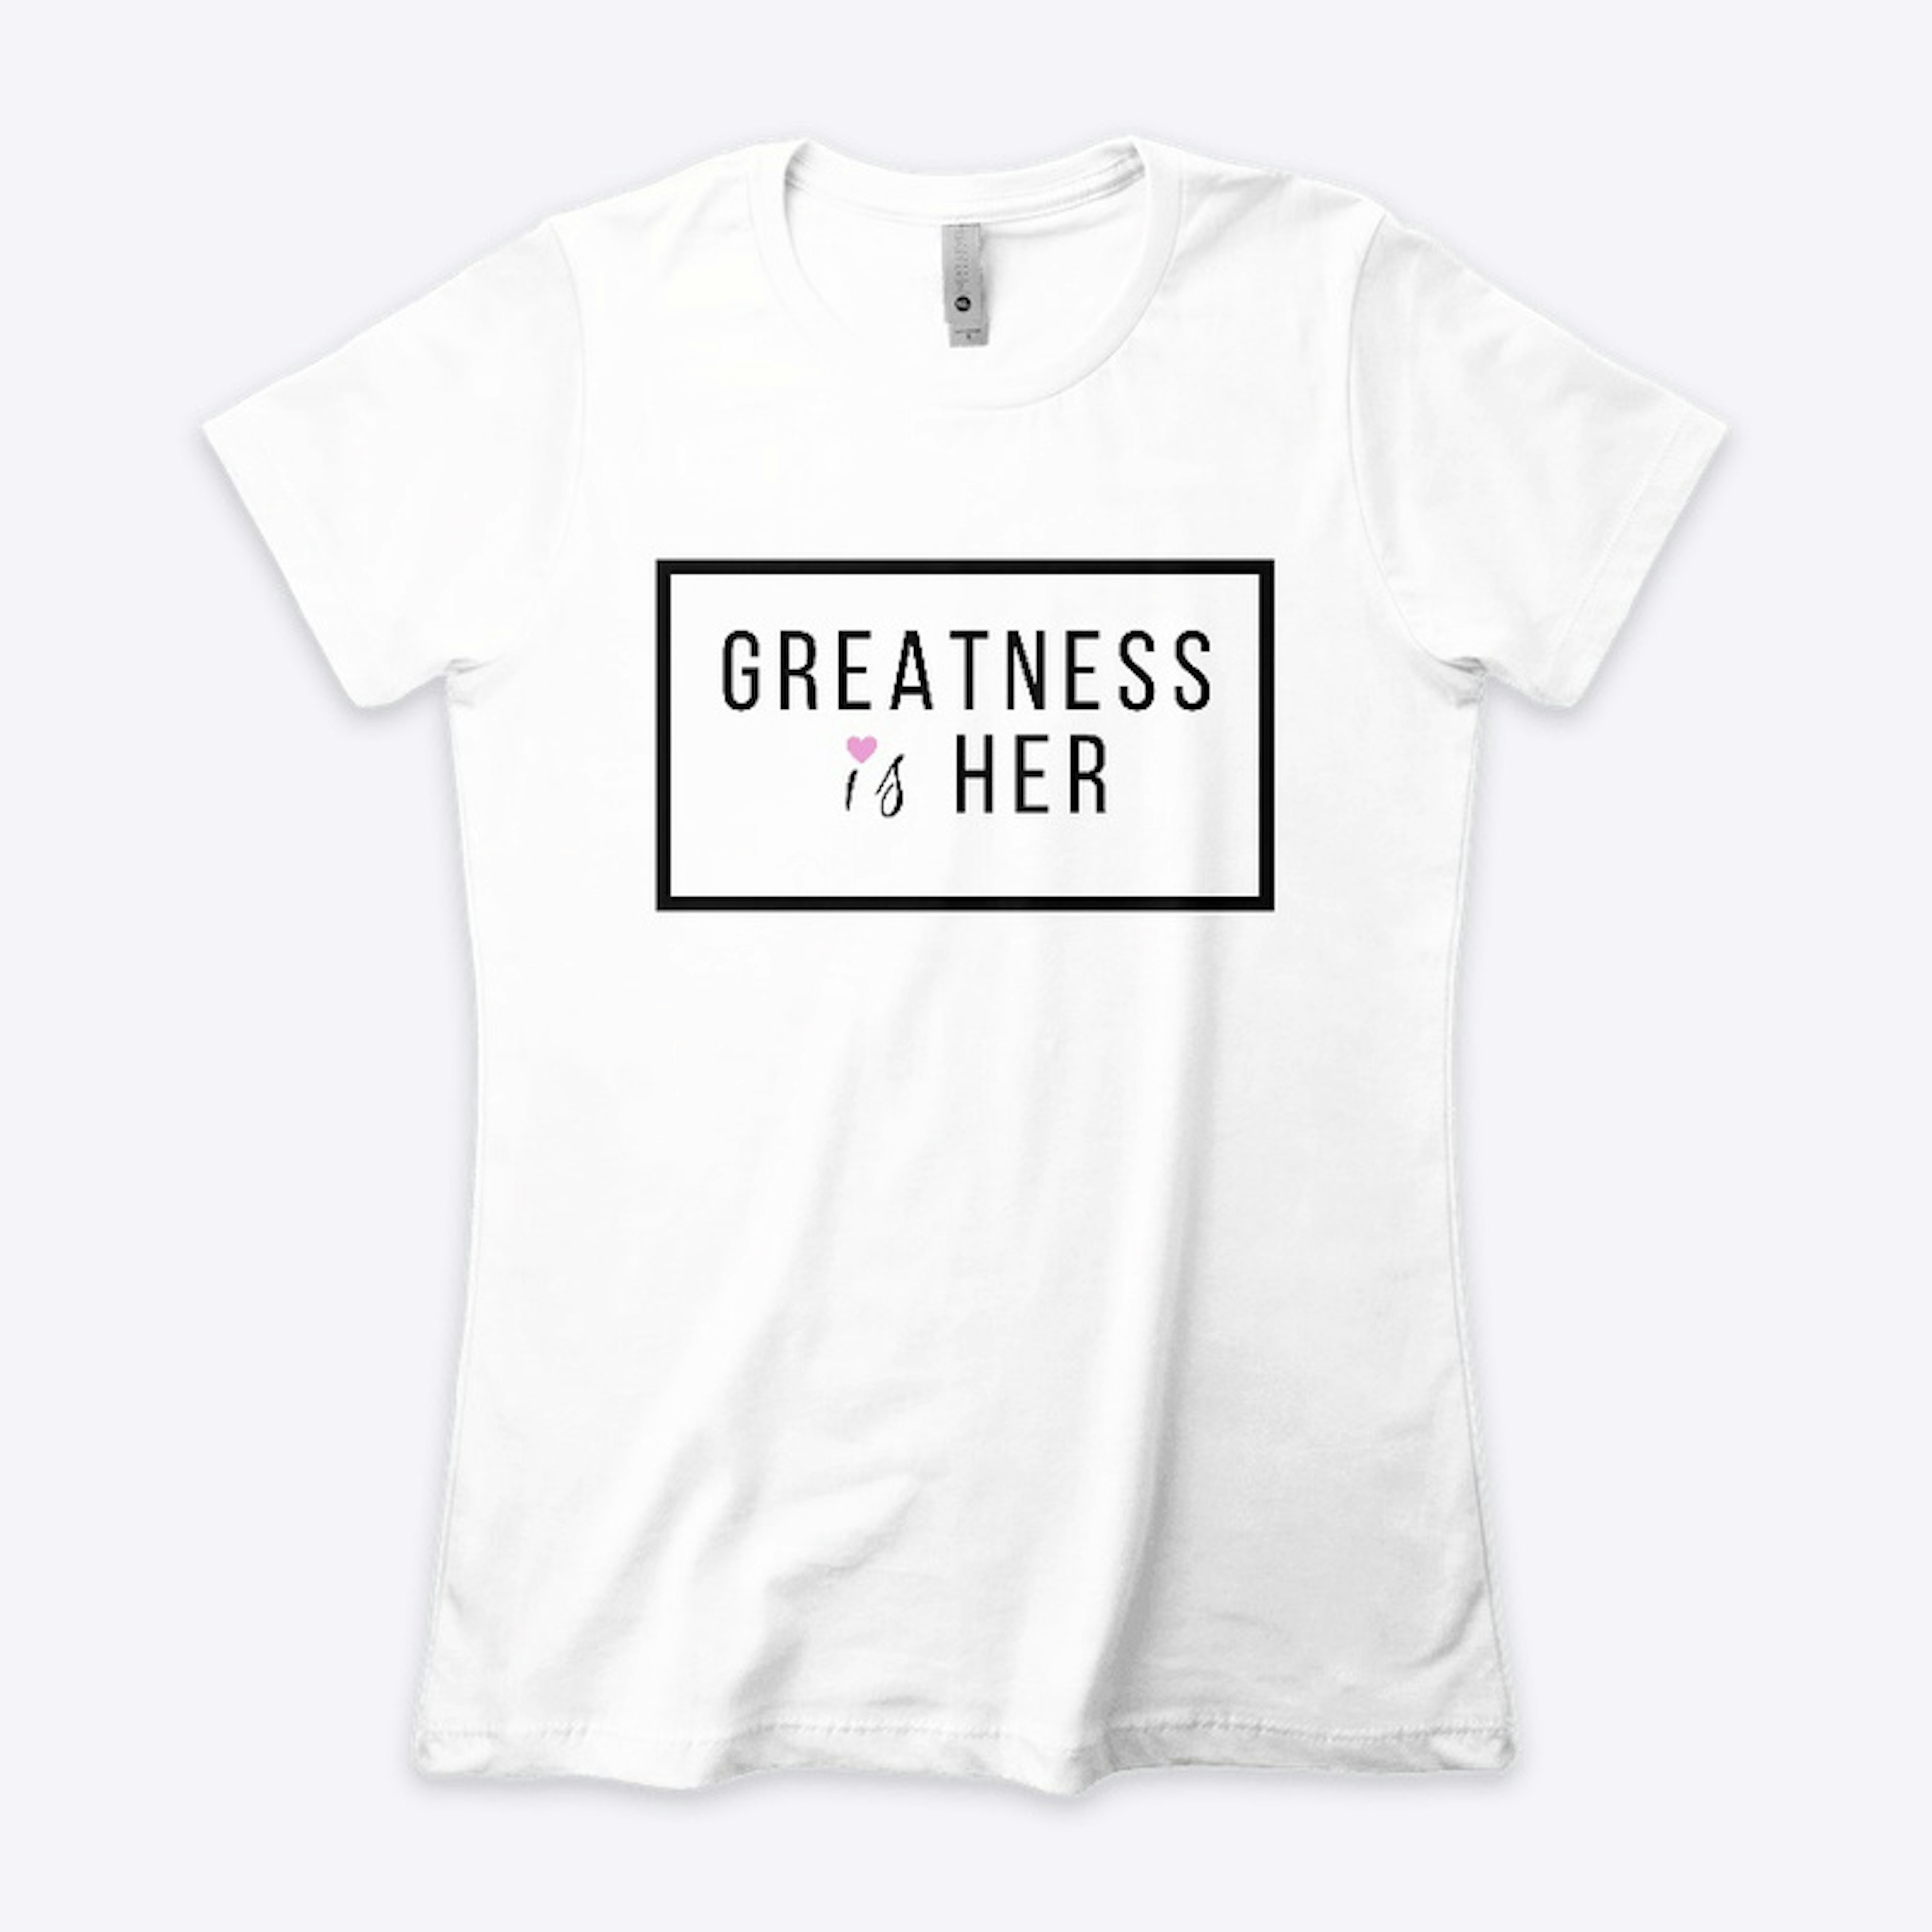 Greatness is her signature tee